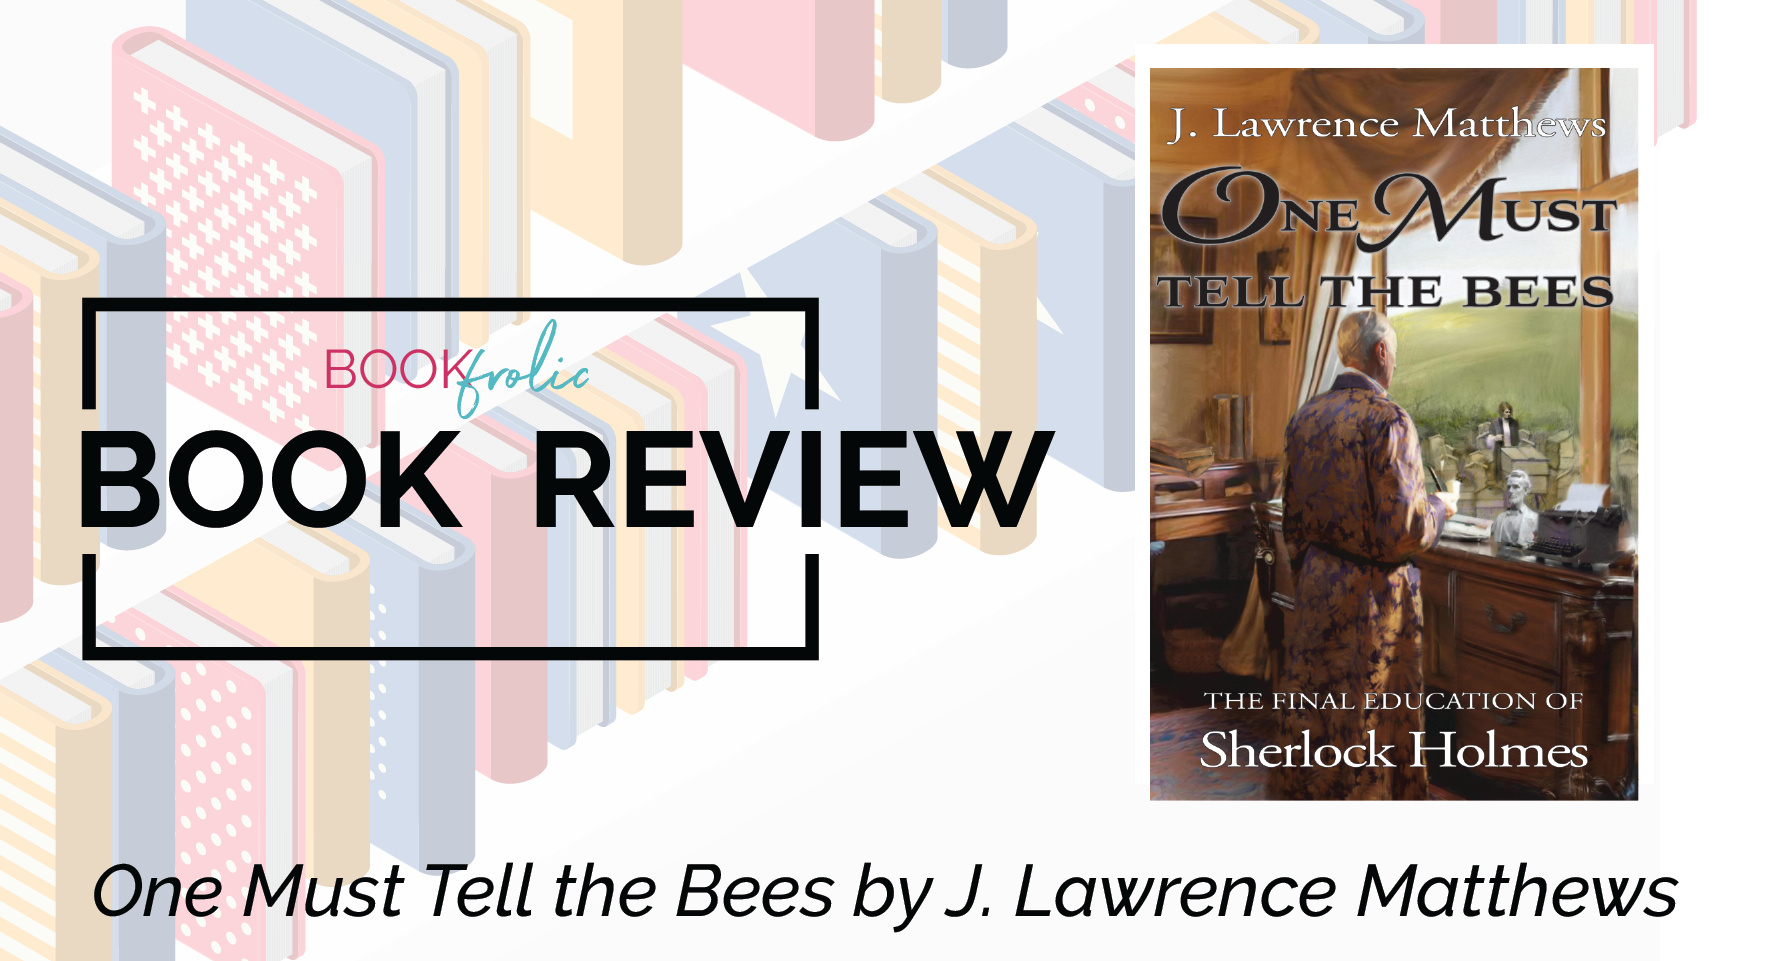 One Must Tell the Bees by J. Lawrence Matthews